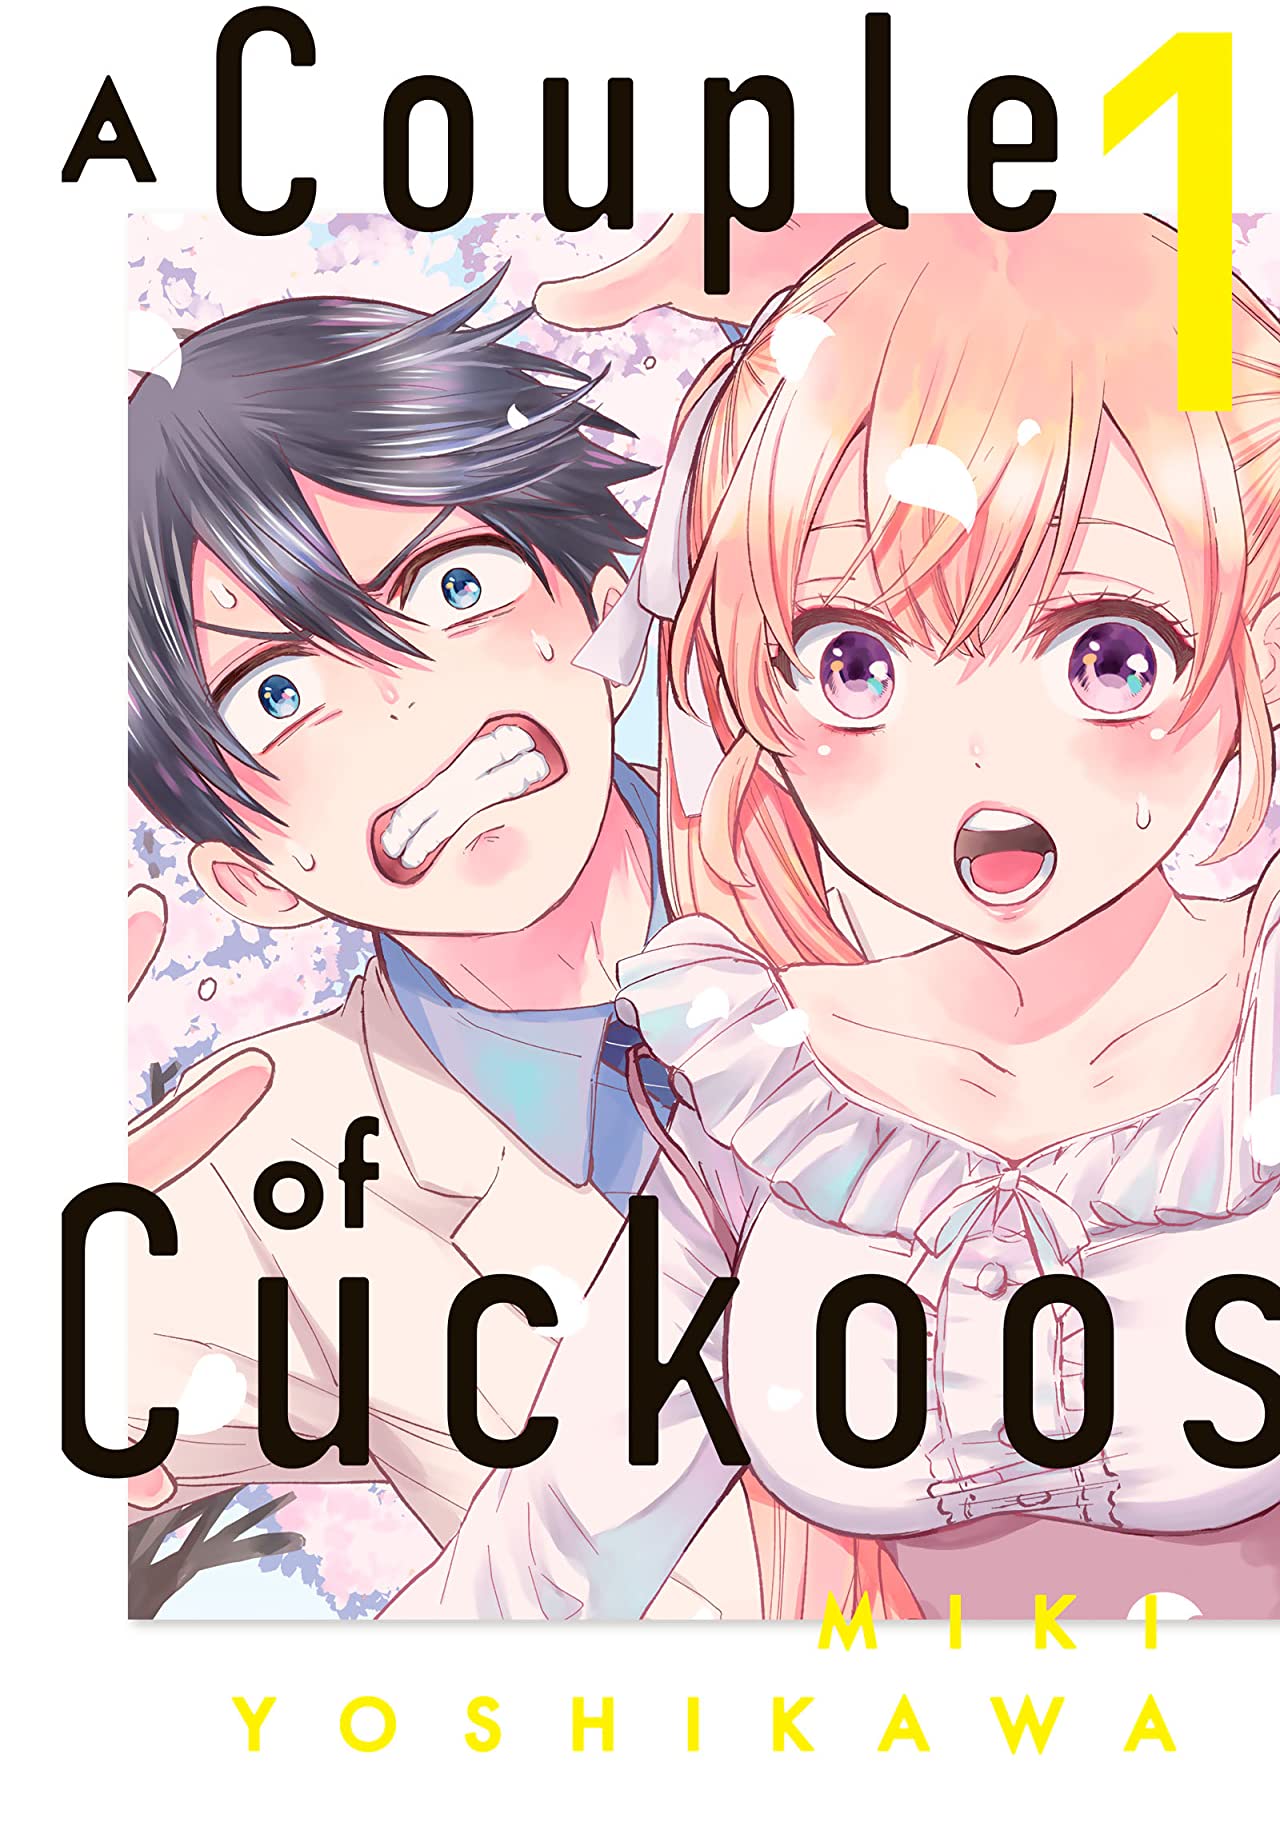 A Couple Of Cuckoos Volume 1 Manga Review Theoasg